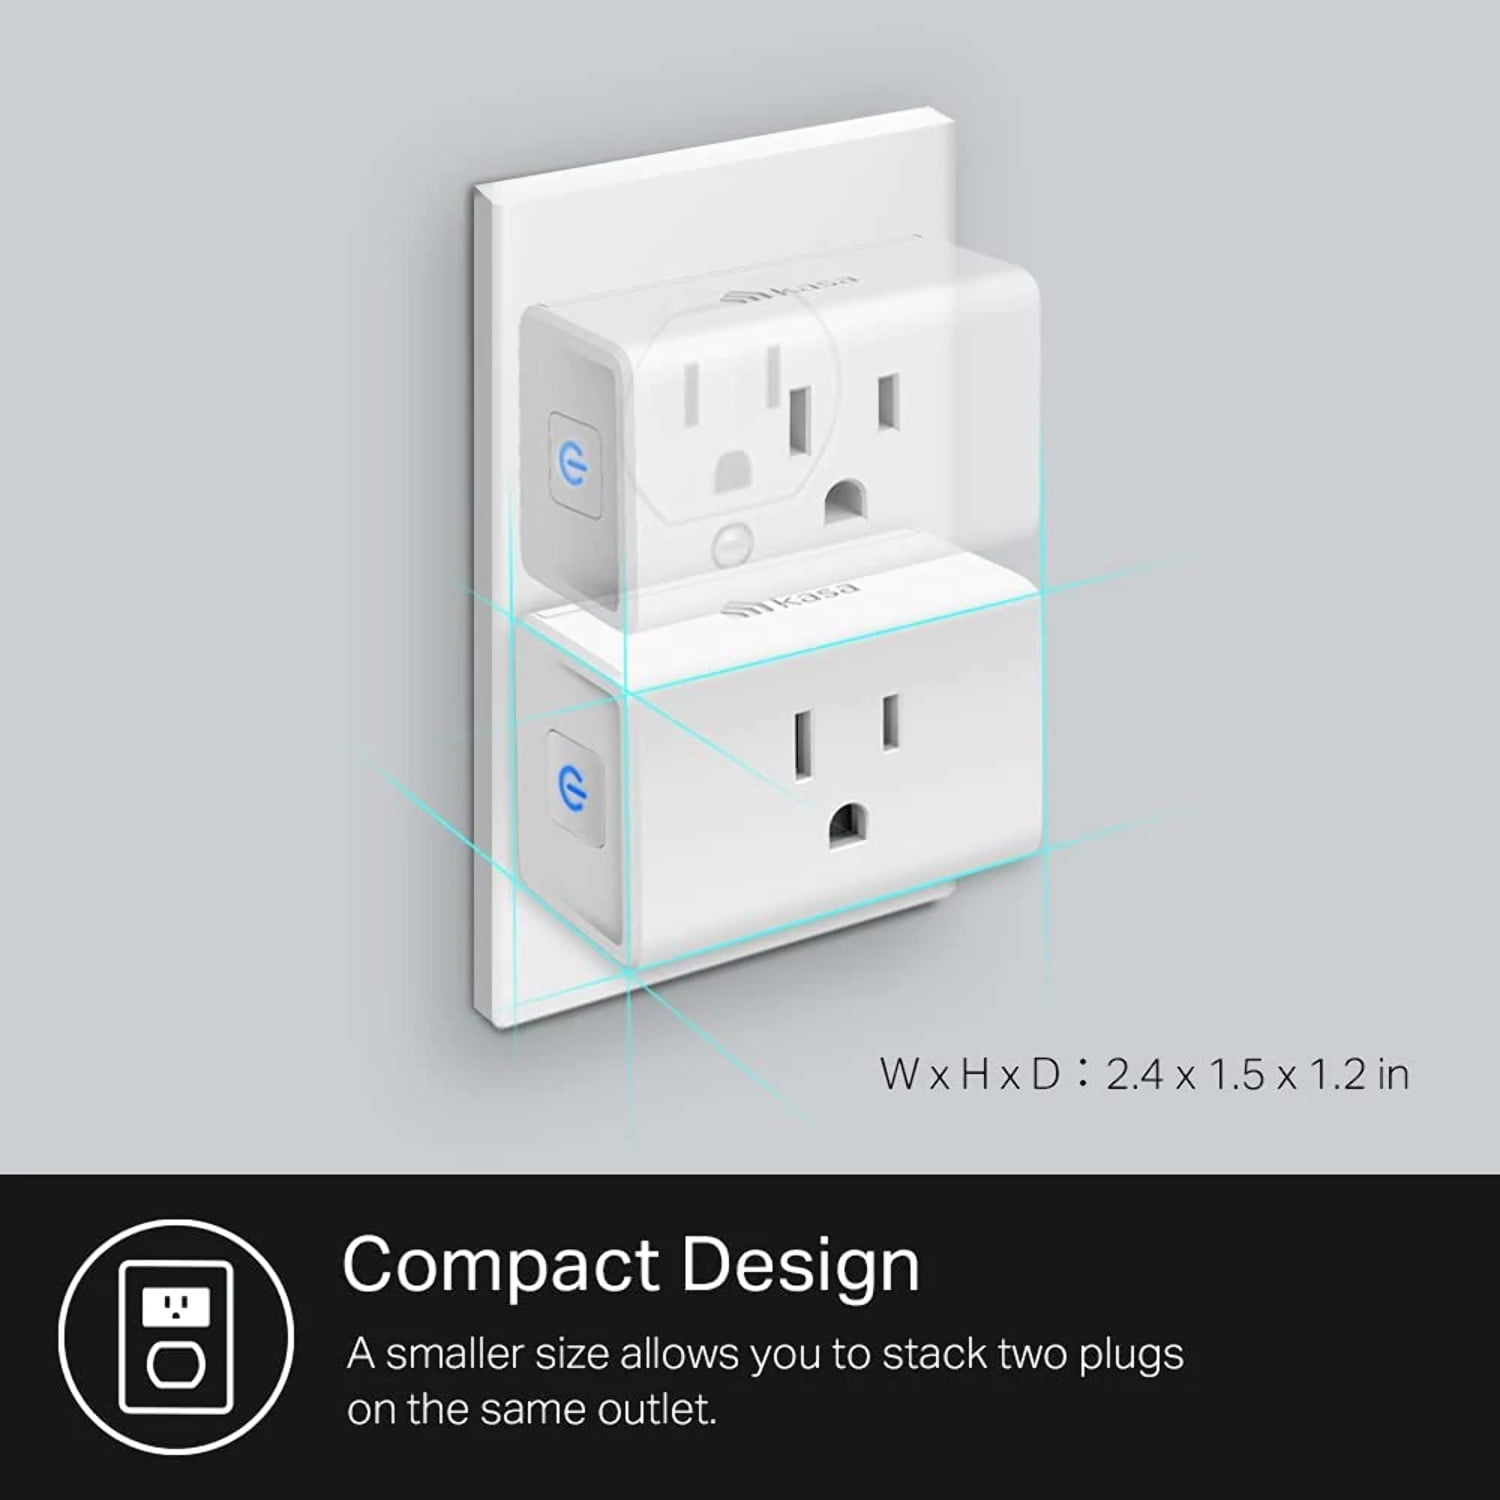 TP-Link US on X: This summer is made for smart plugs!🔌 Introducing our  new Kasa Smart Plug, EP10 & Kasa Outdoor Smart Plug, EP40. These new  designs deliver the best home automation